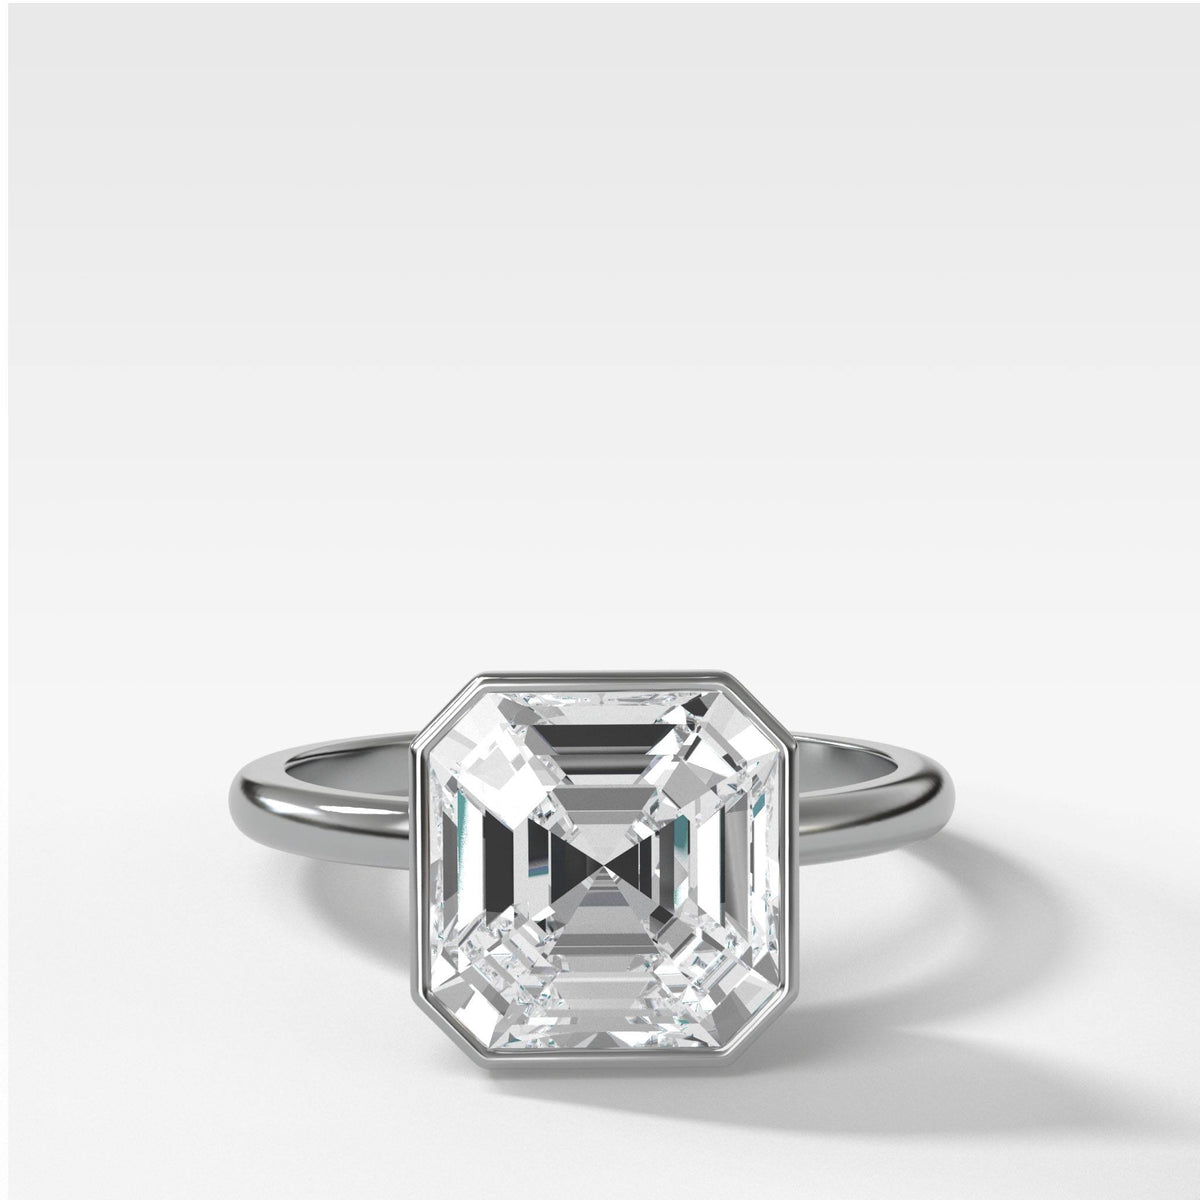 Bezel Penumbra Solitaire With Asscher Cut by Good Stone in White Gold